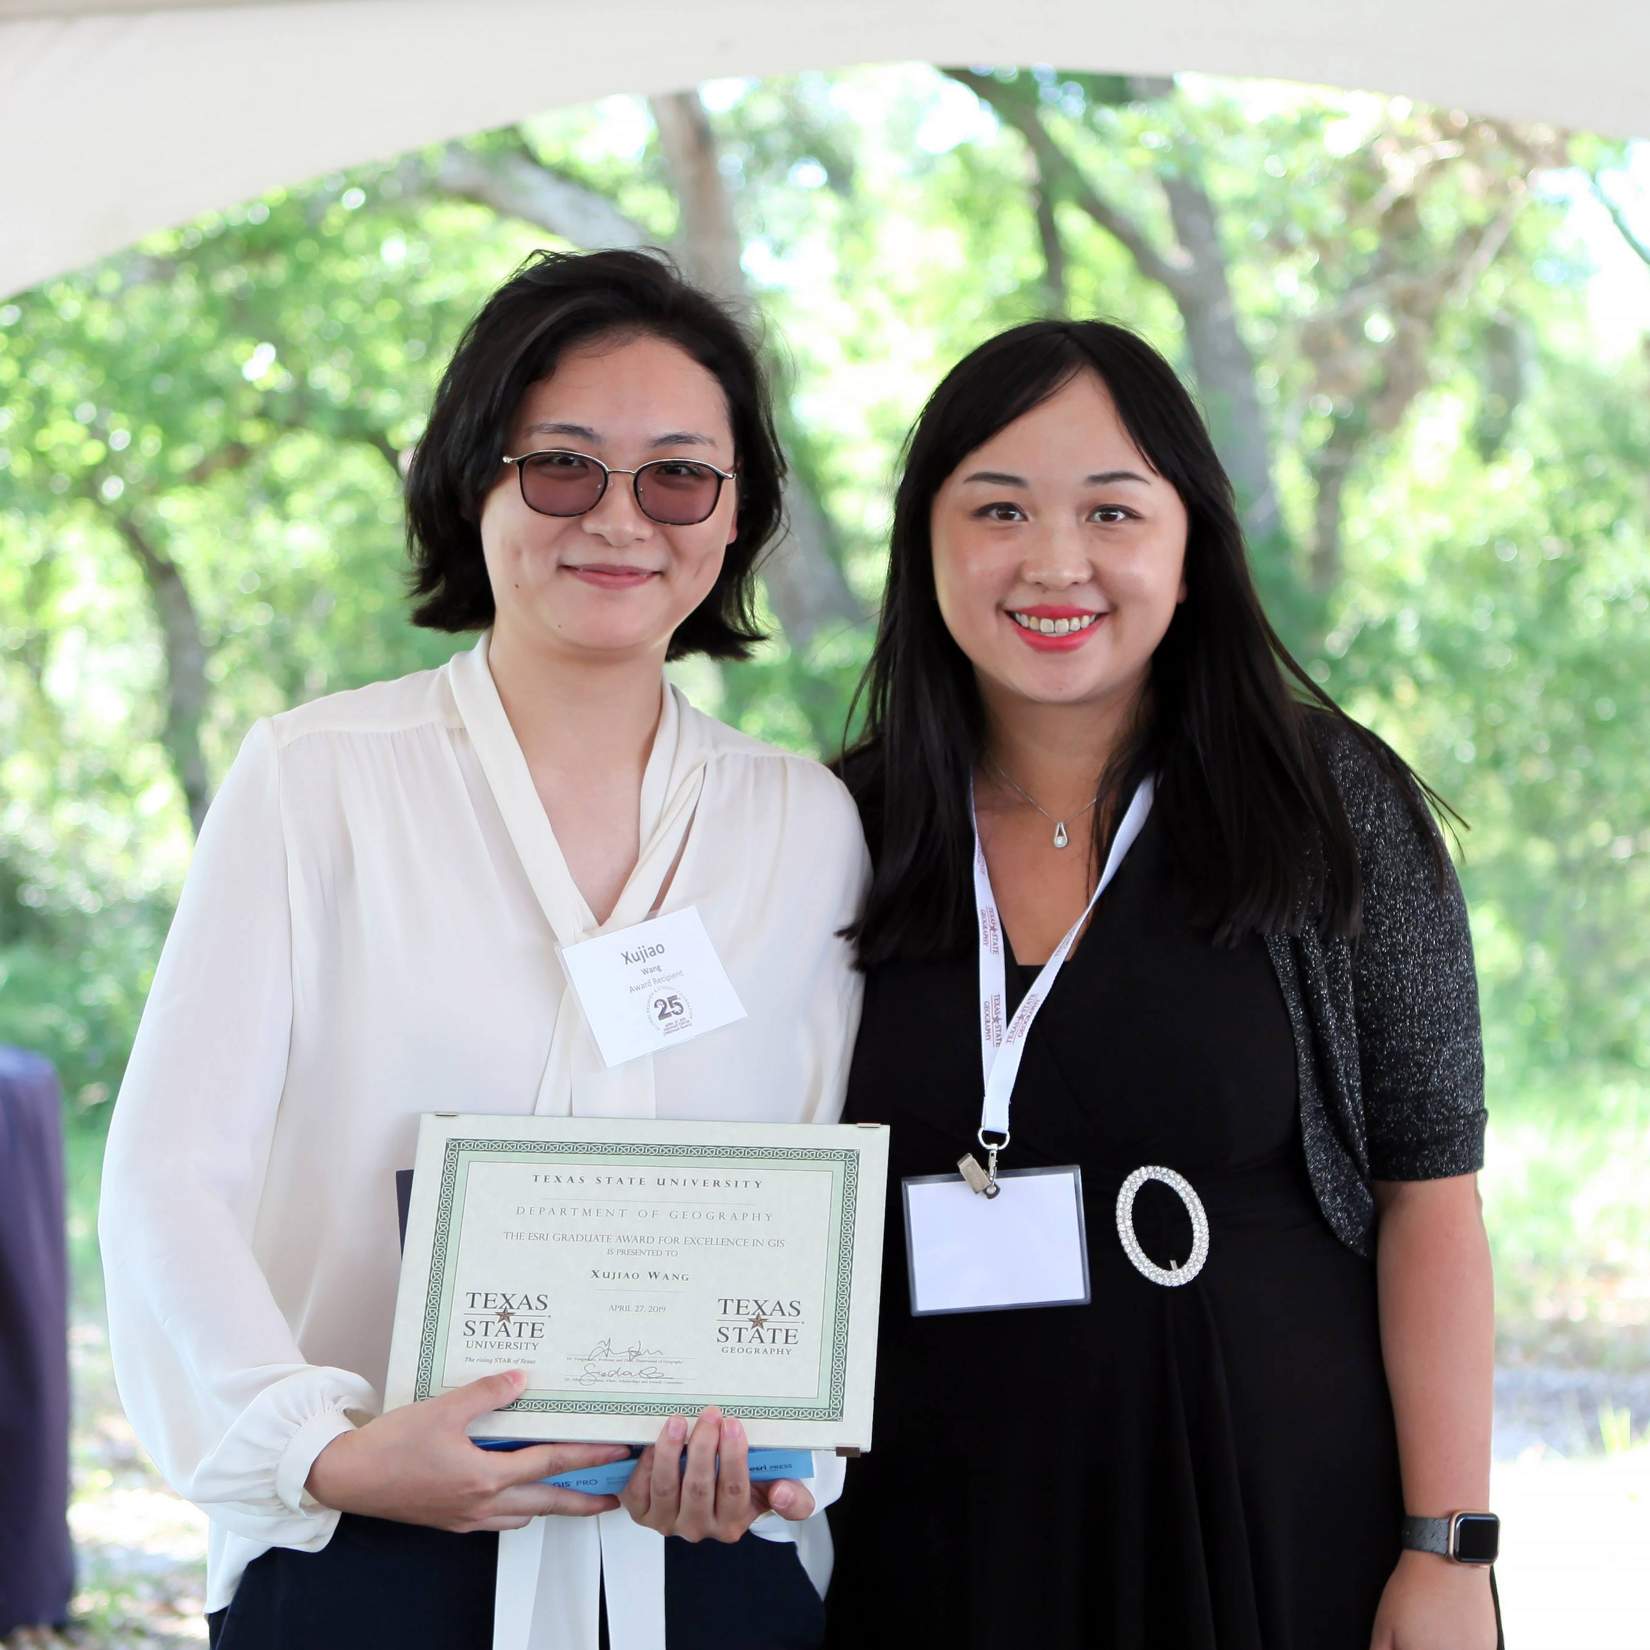 XWang ESRI Graduate Award for Excellence in GIS